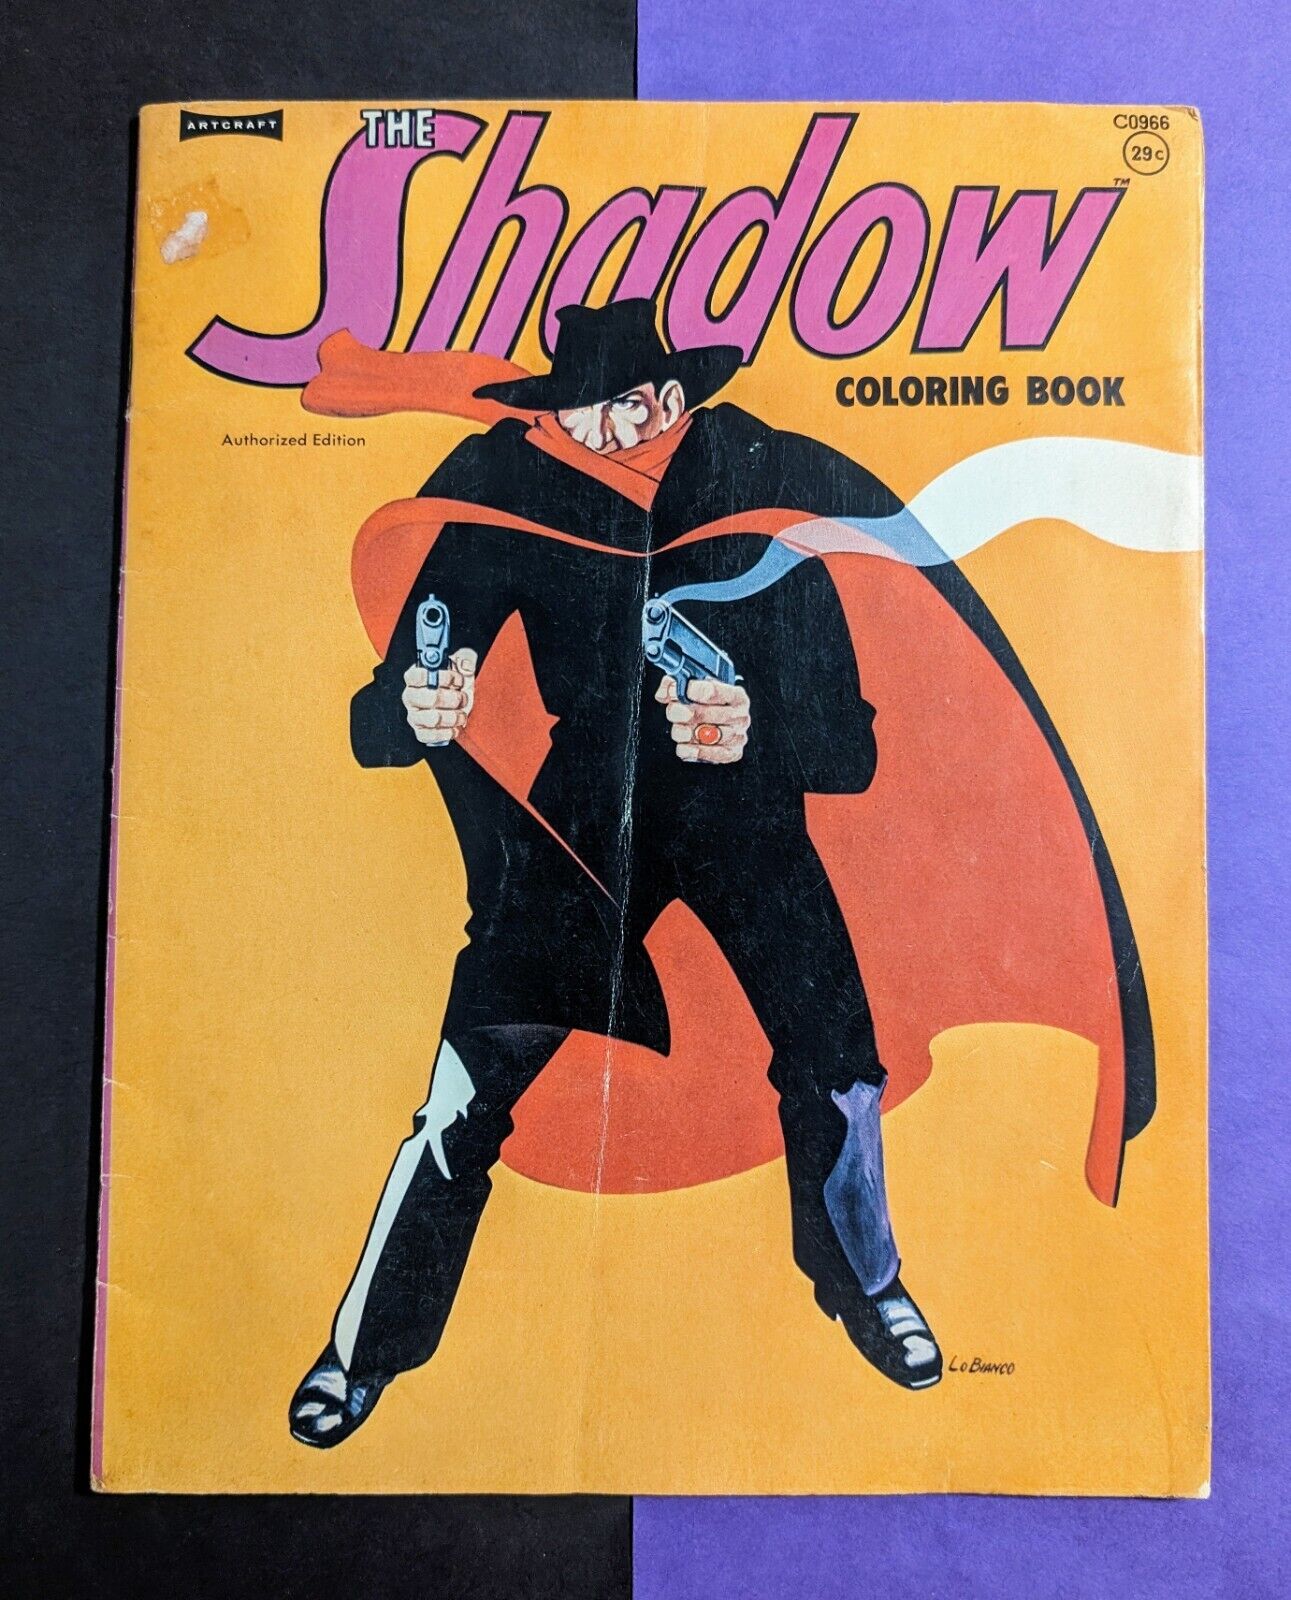 Vtg 1974 The Shadow Coloring Book - Artcraft Authorized  - Lo Bianco - Light Use